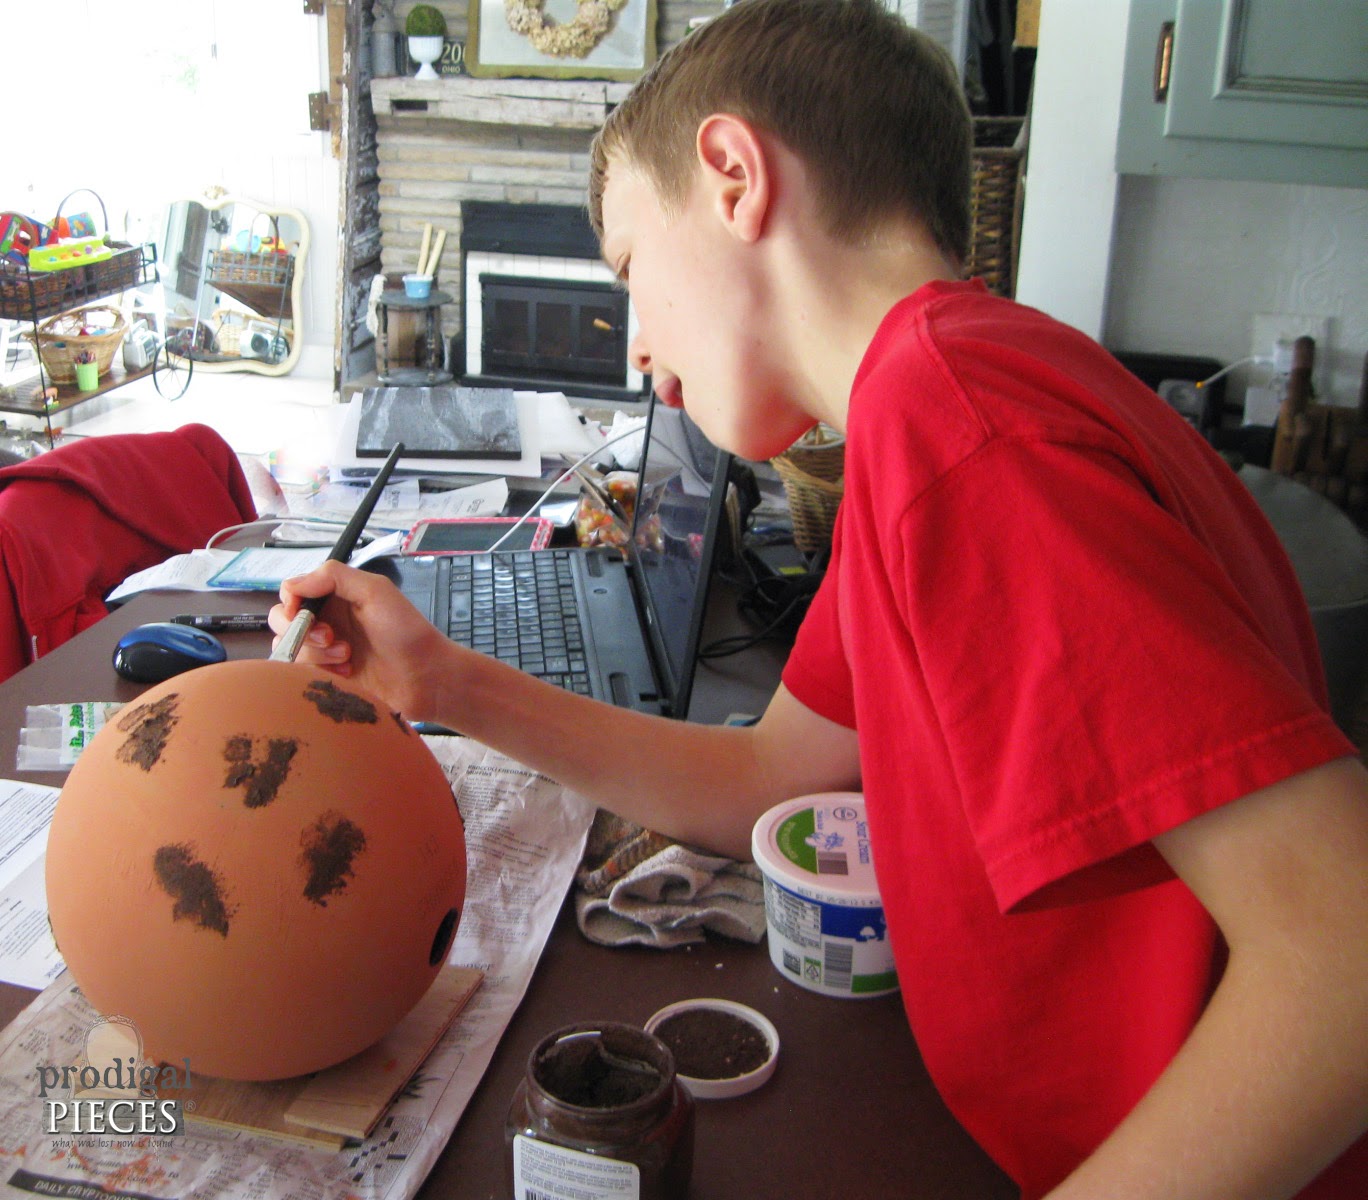 DIY Bowling Ball Repurposed into Pumpkin by Prodigal Pieces http://www.prodigalpieces.com